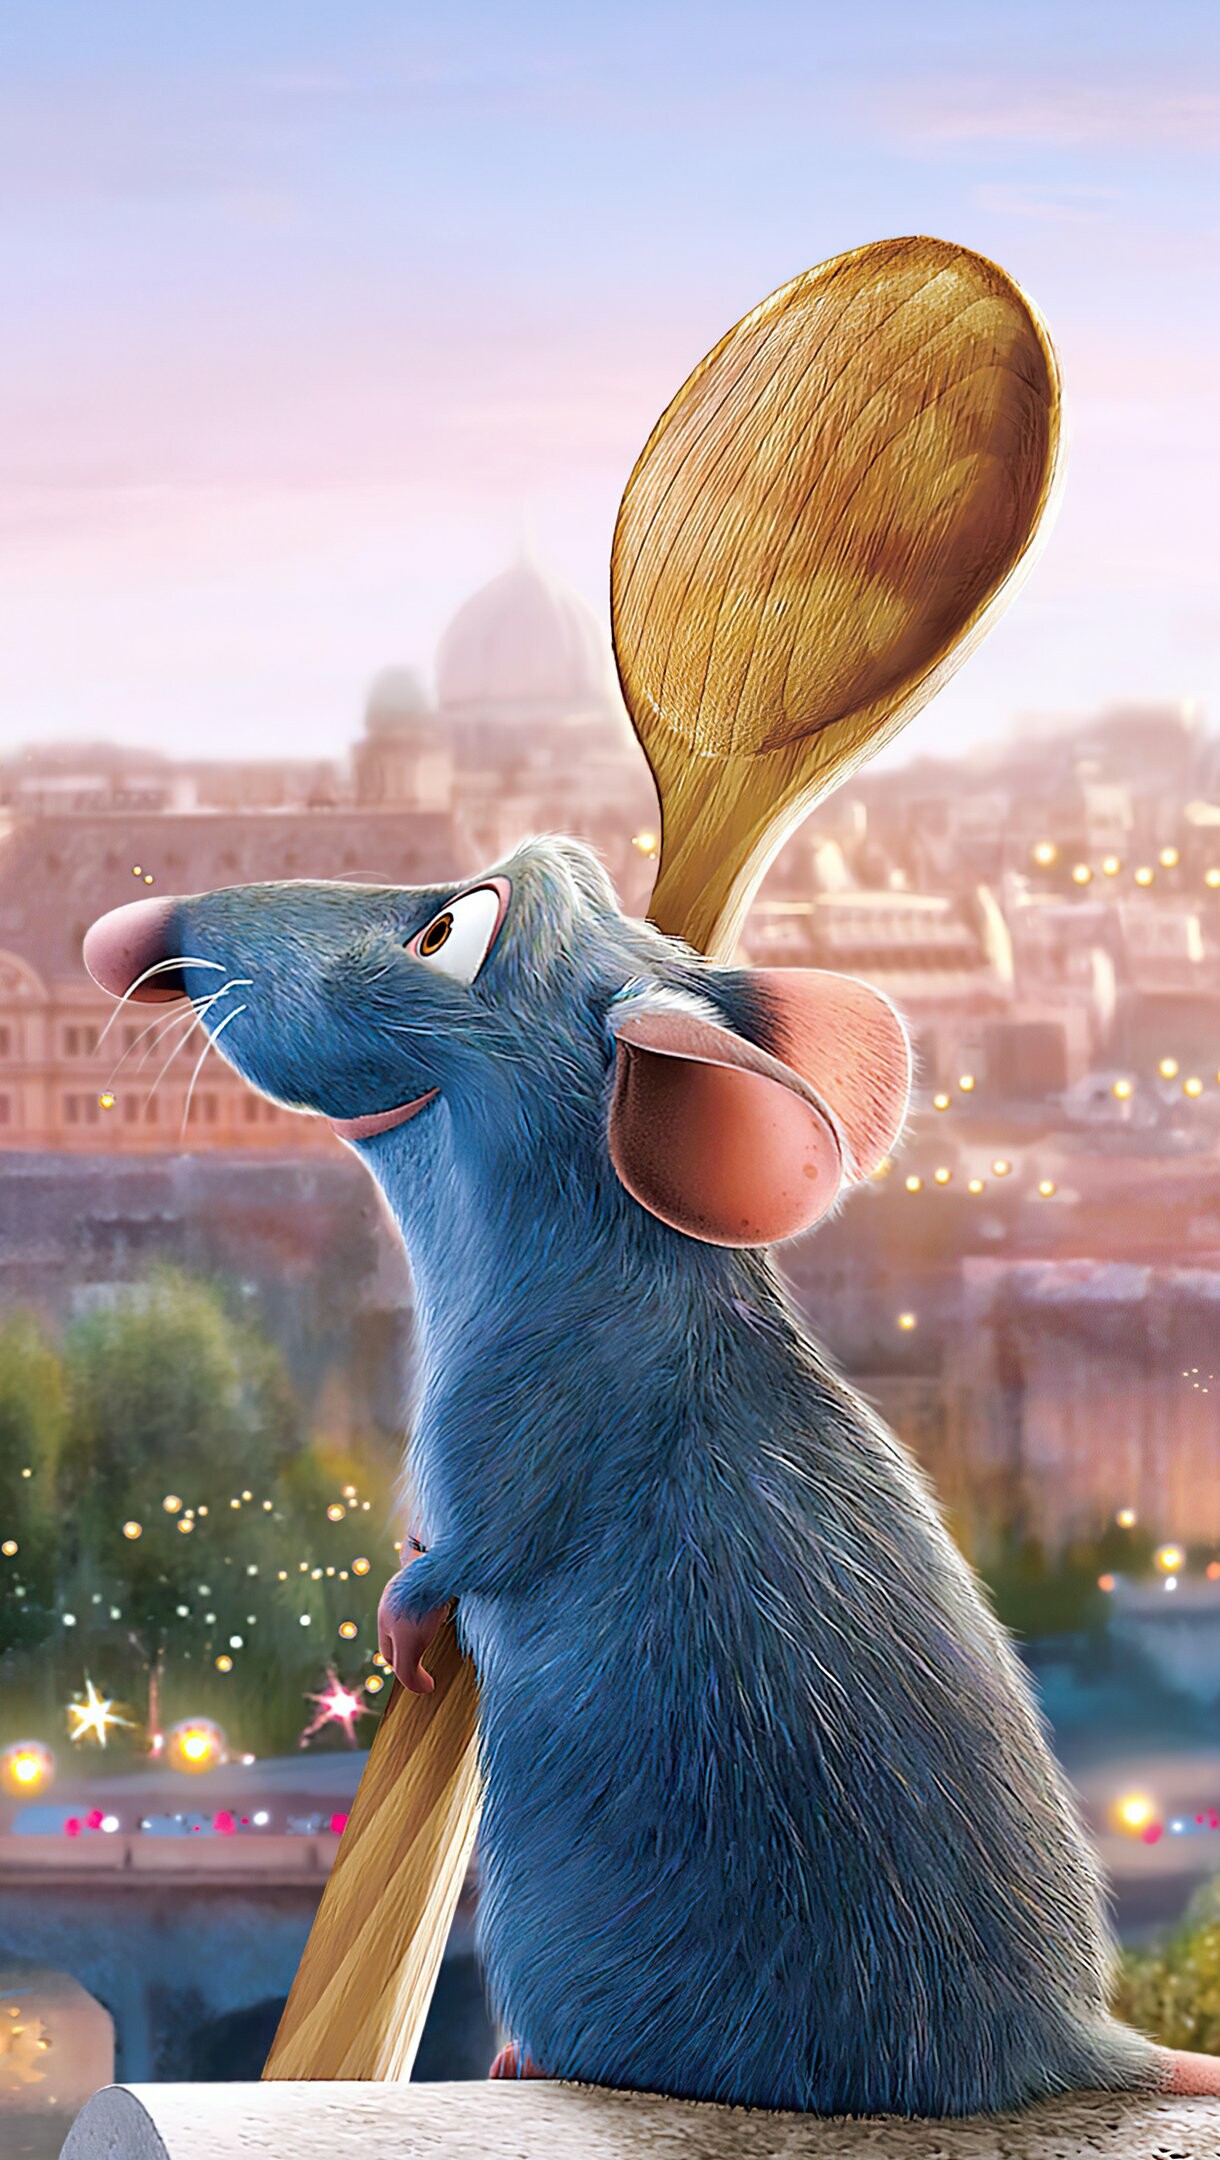 Ratatouille: The animated film from Pixar, the industry’s leading computer animation studio. 1220x2160 HD Background.